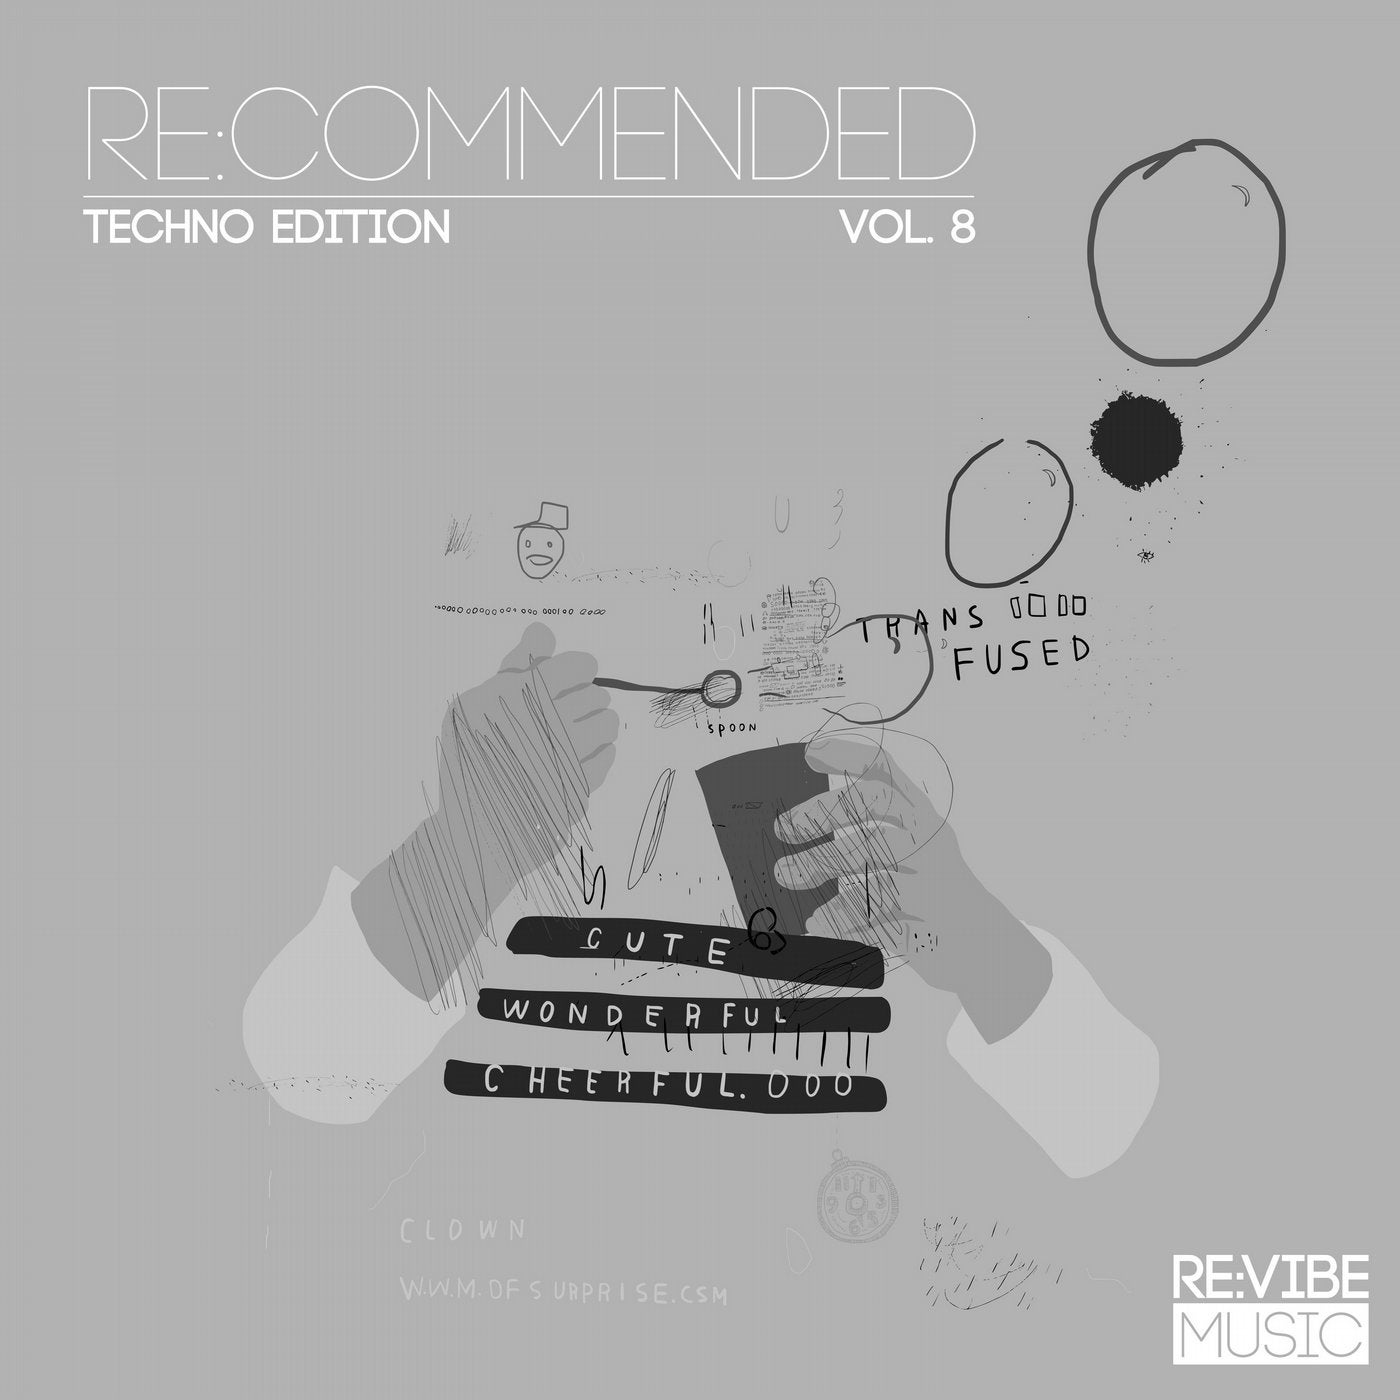 Re:Commended - Techno Edition, Vol. 8